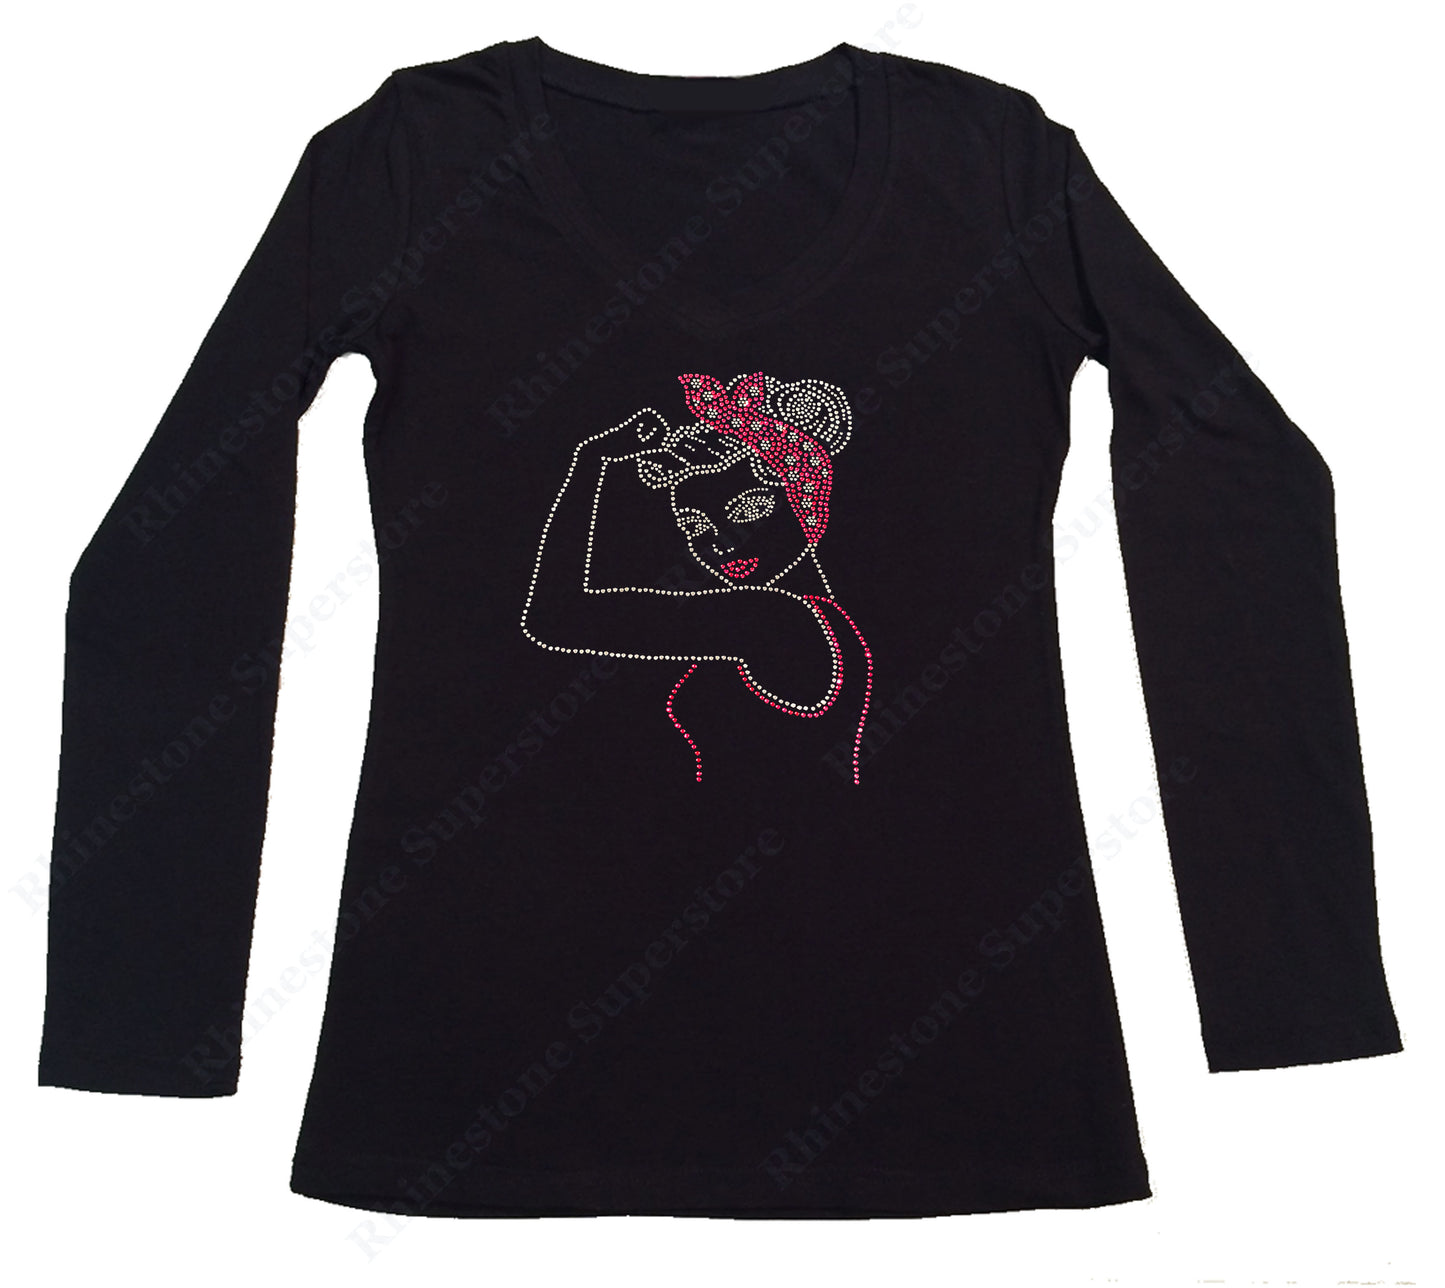 Womens T-shirt with Pink Pin Up Girl in Rhinestones